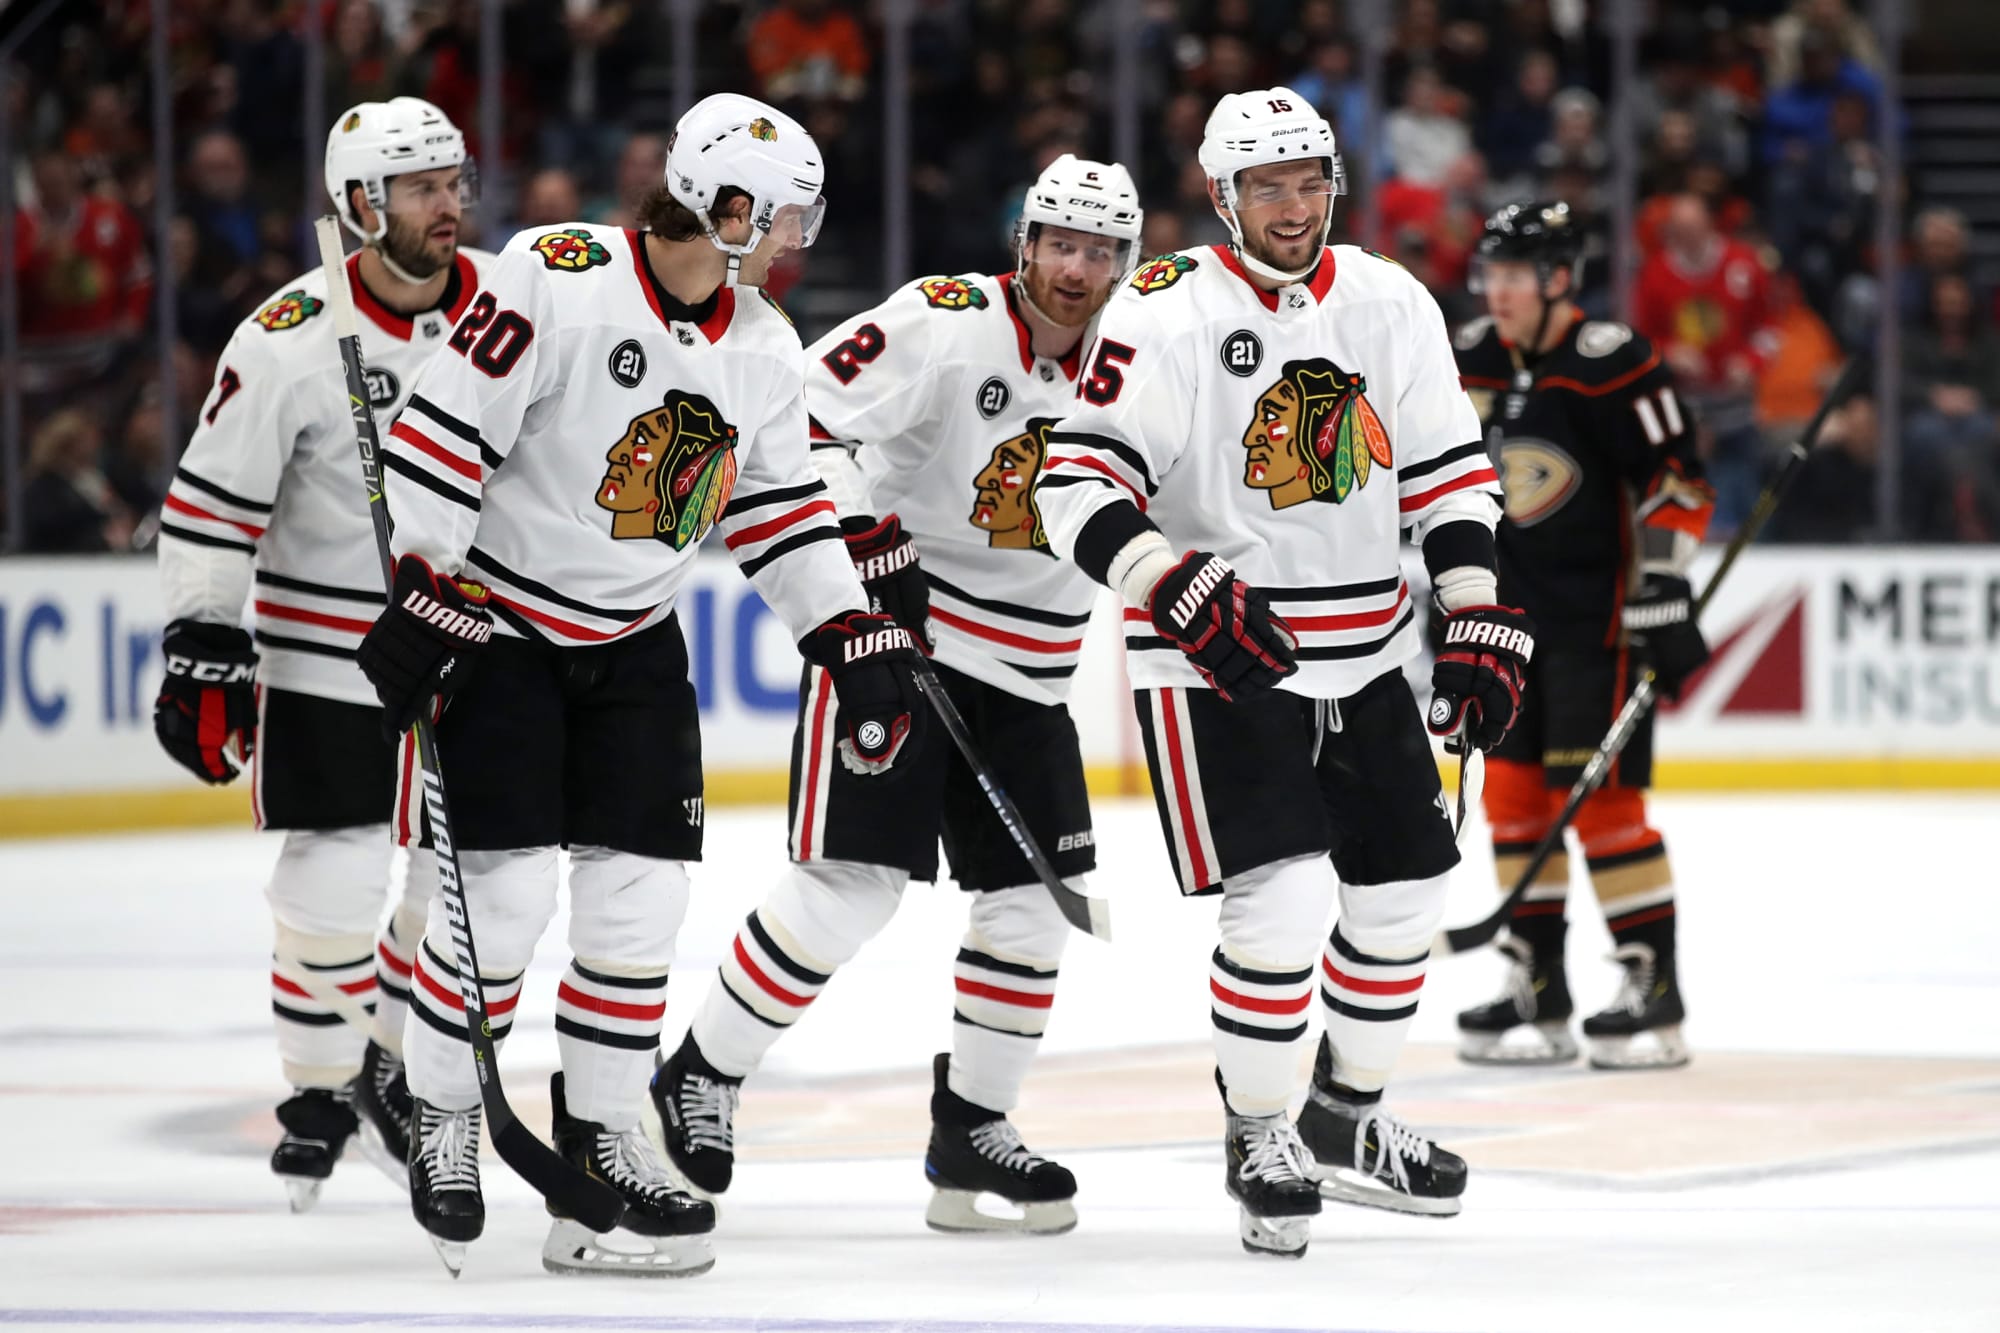 Blackhawks: Play-in Schedule is going to be a challenge